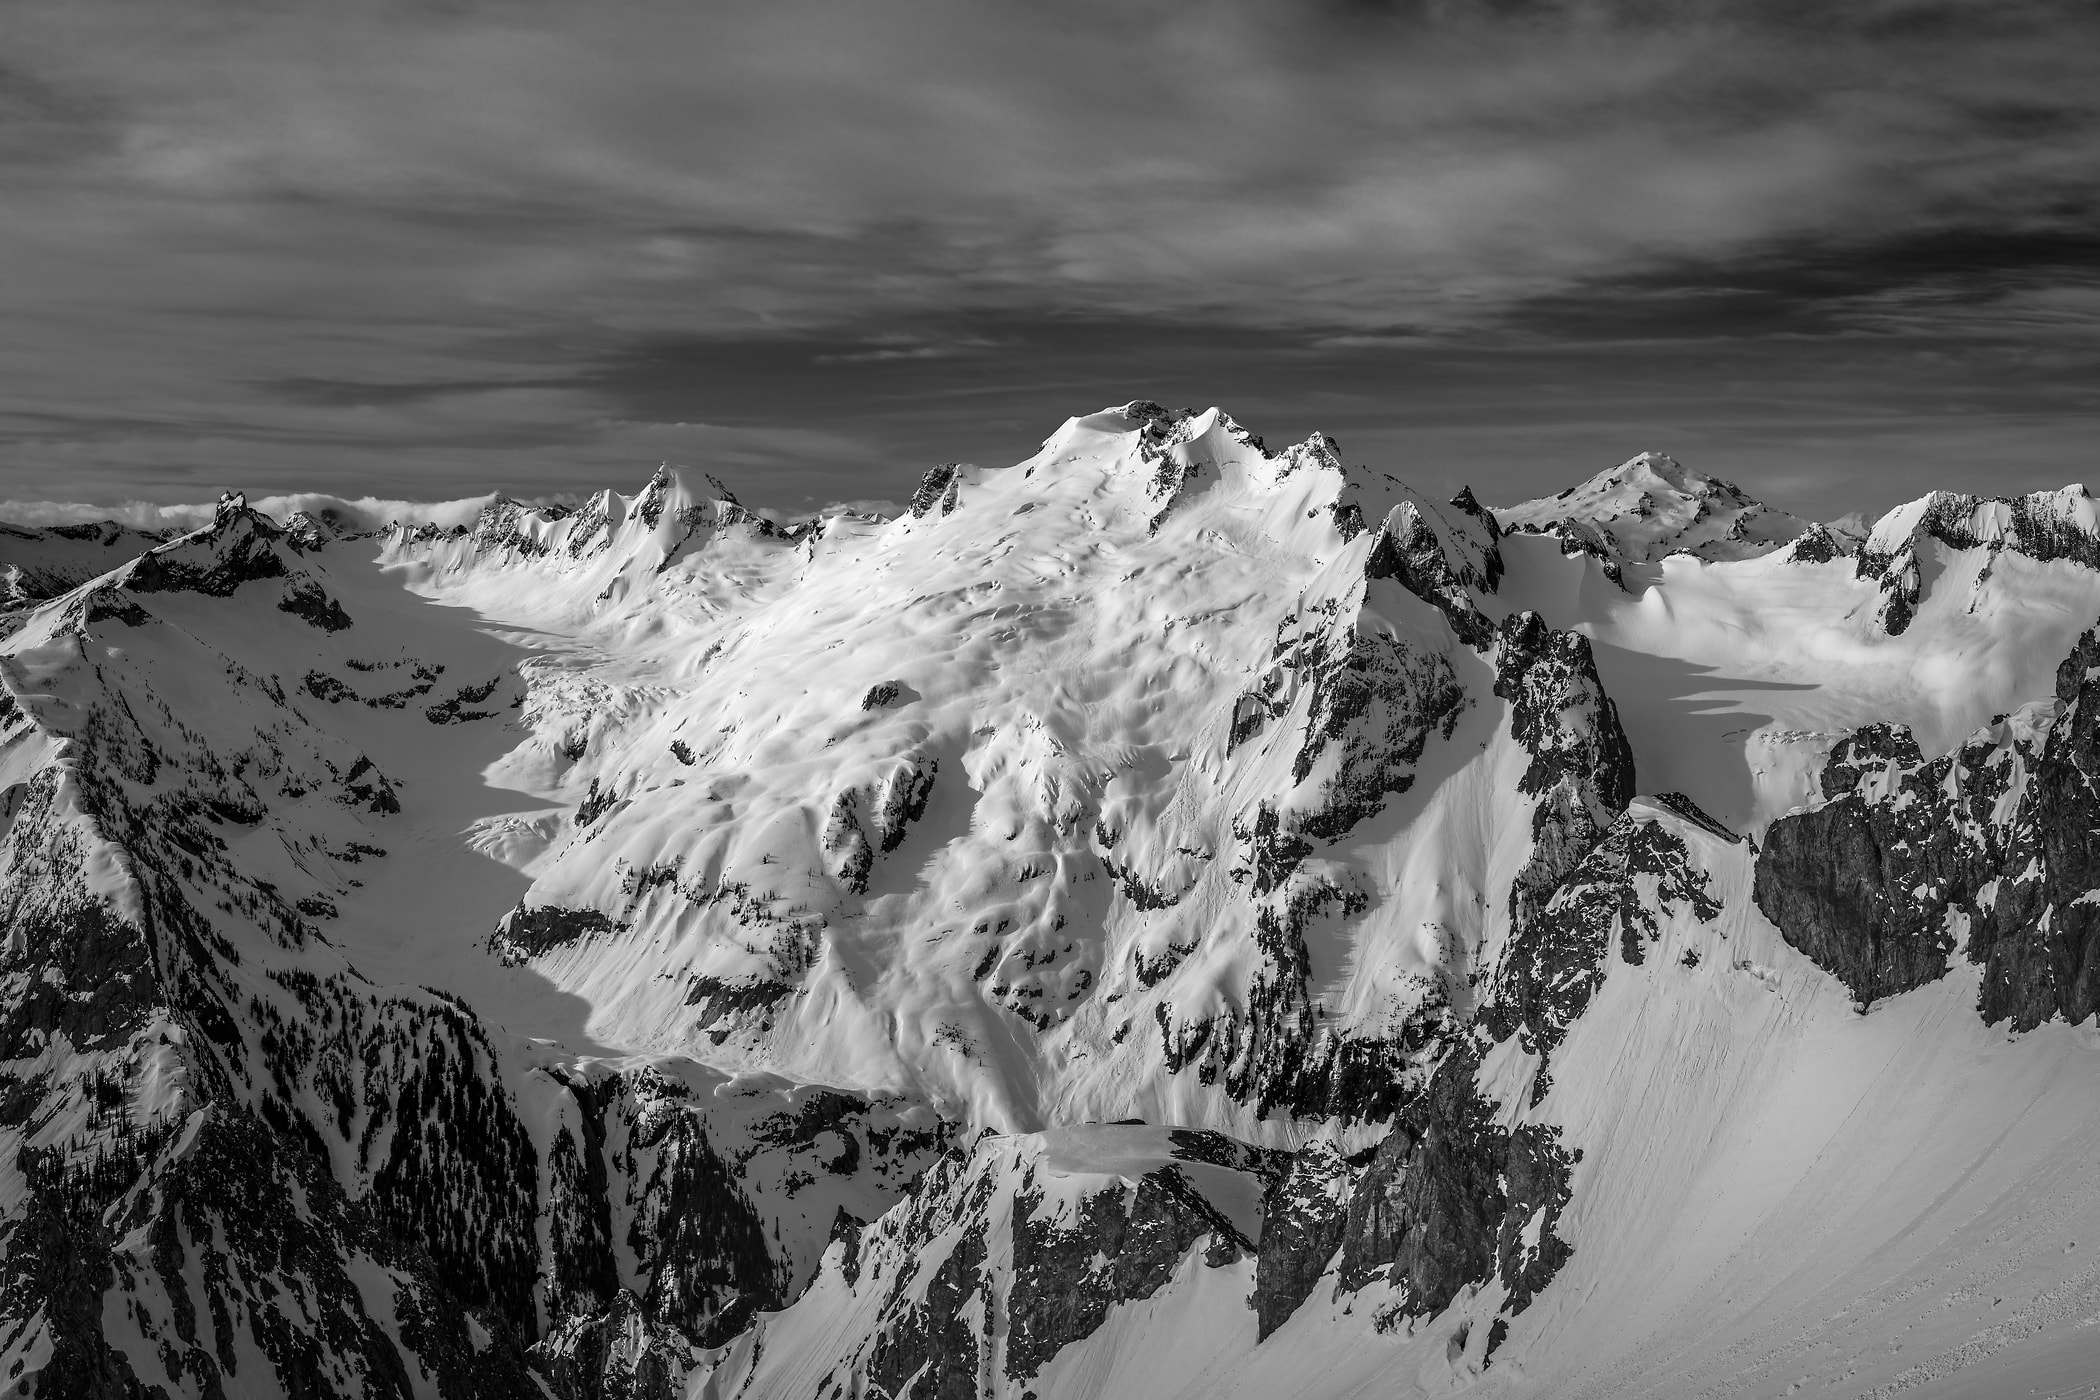 216 megapixels! A very high resolution, large-format VAST photo print of ski tracks down a large mountain; artistic black and white photograph created by Scott Rinckenberger in Dome Peak, Glacier Peak Wilderness, Washington